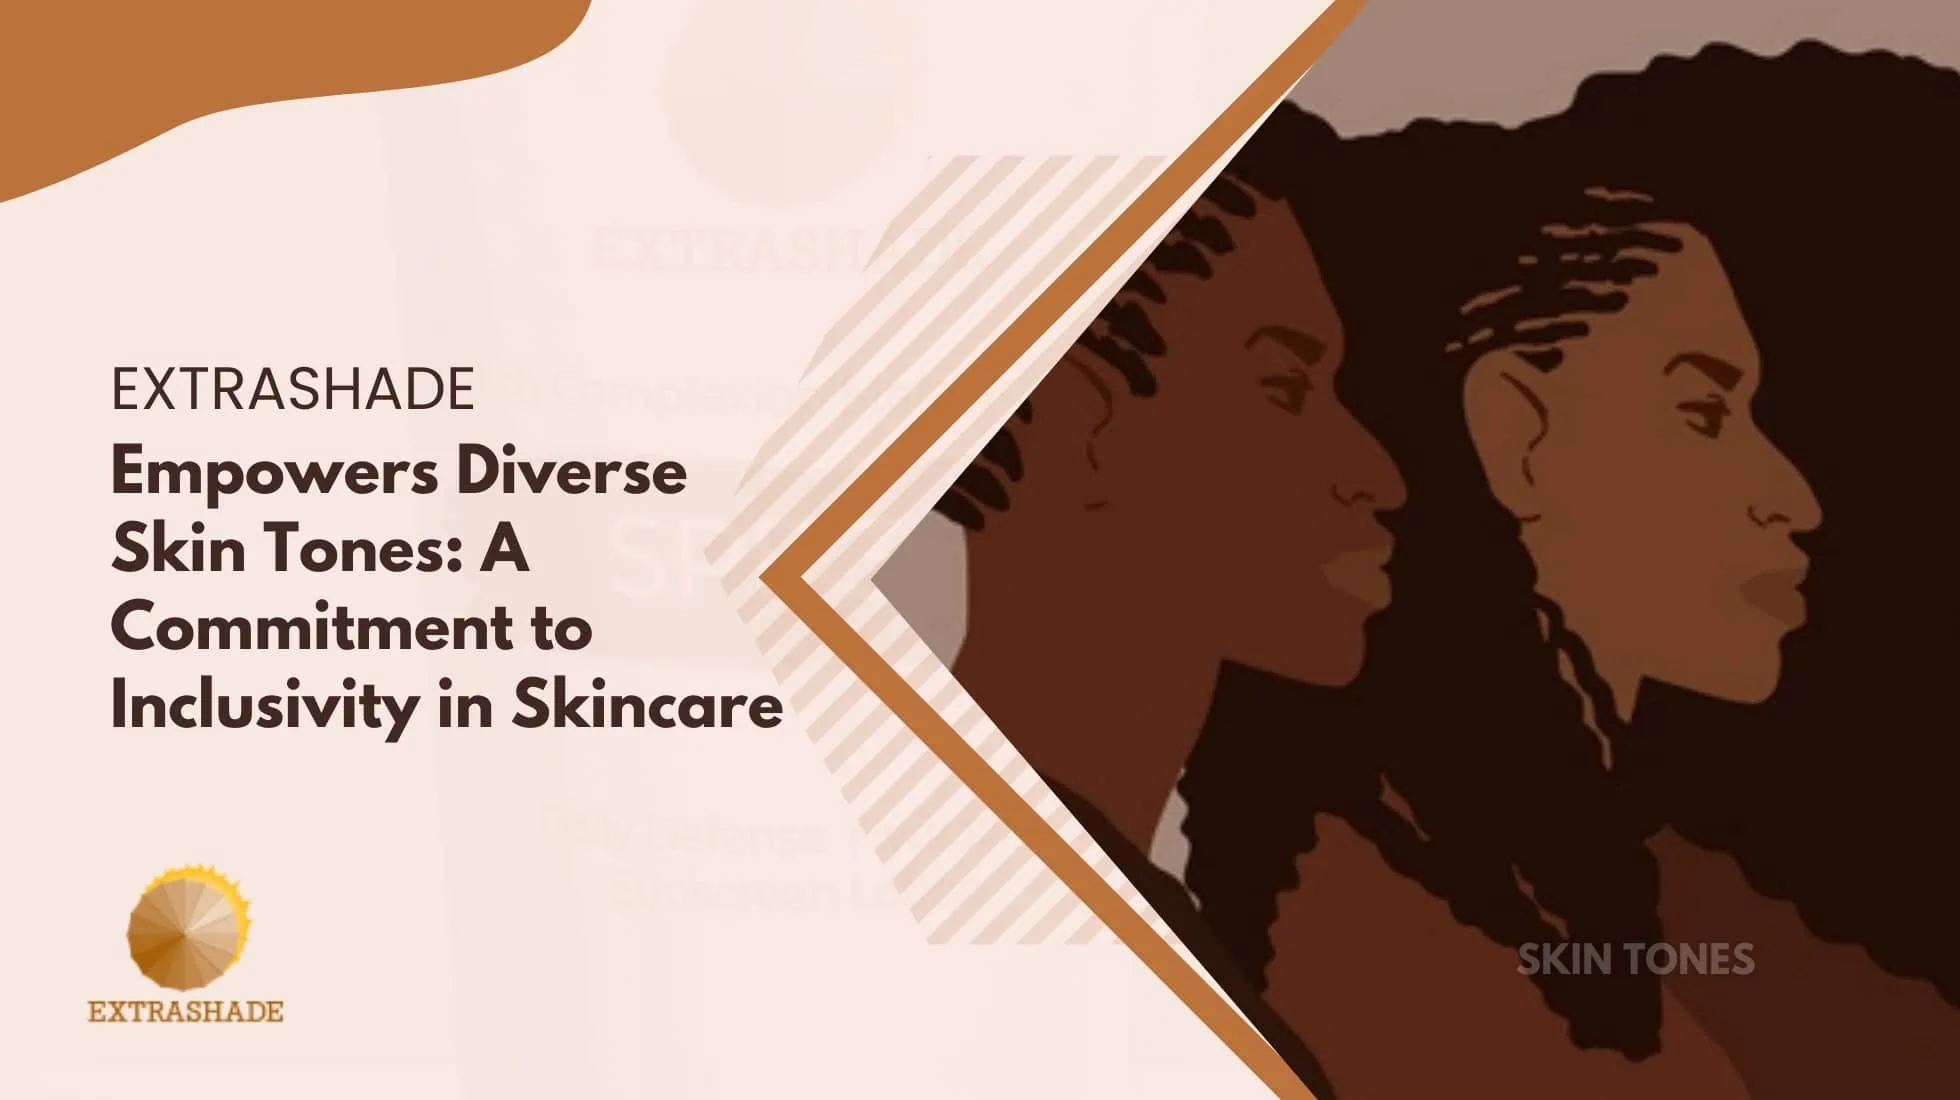 EXTRASHADE Empowers Diverse Skin Tones A Commitment to Inclusivity in Skincare